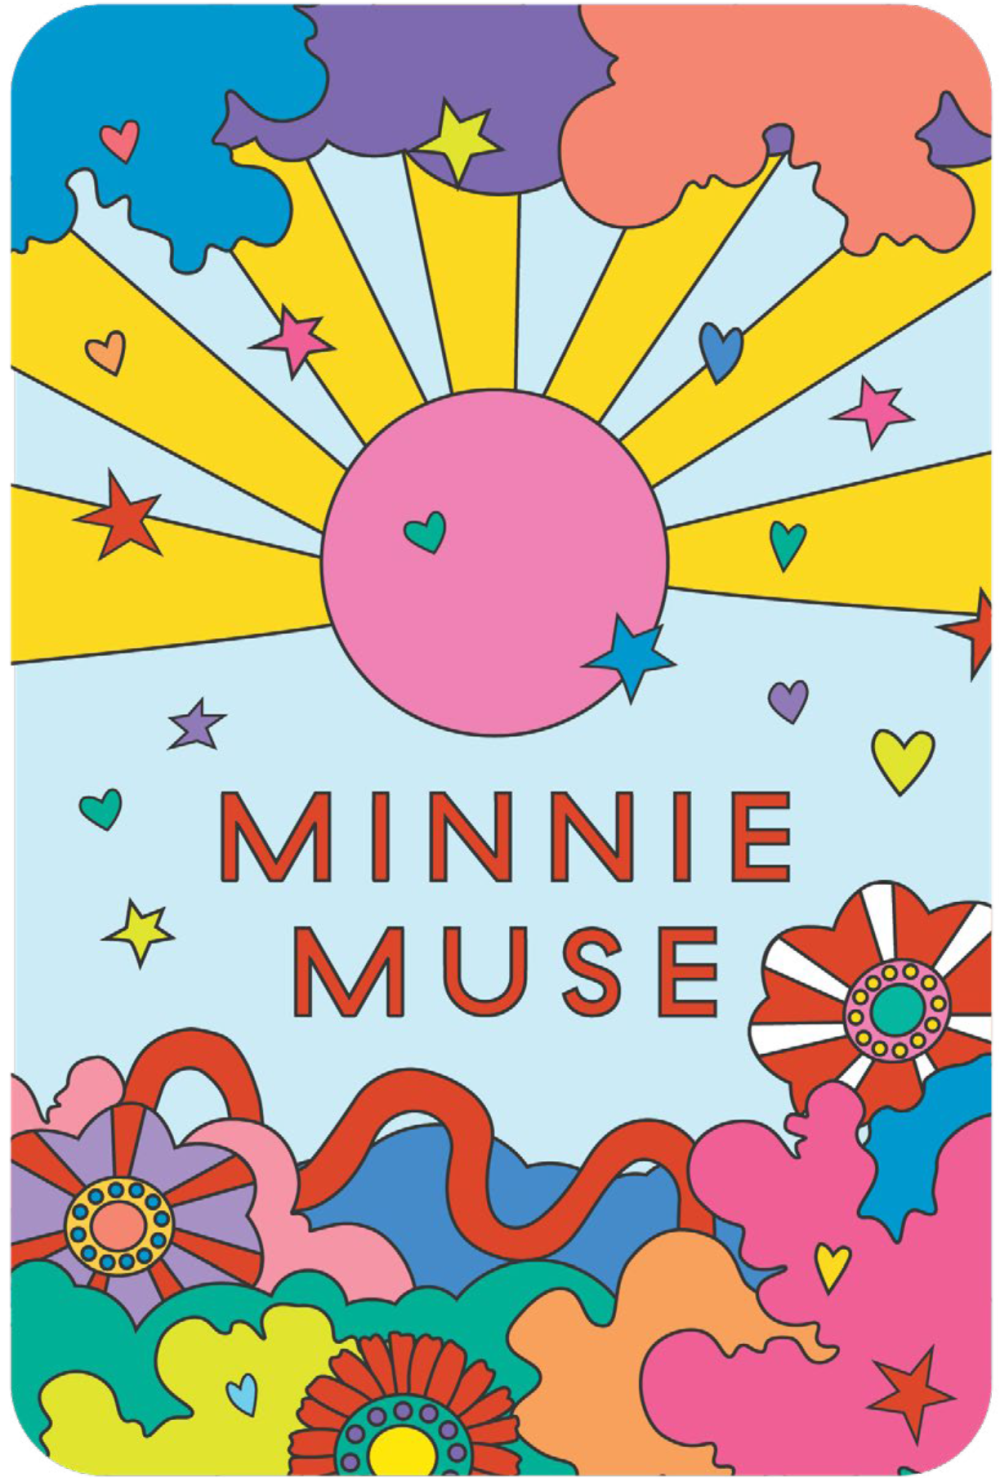  Minnie Muse , Library Card, Front 